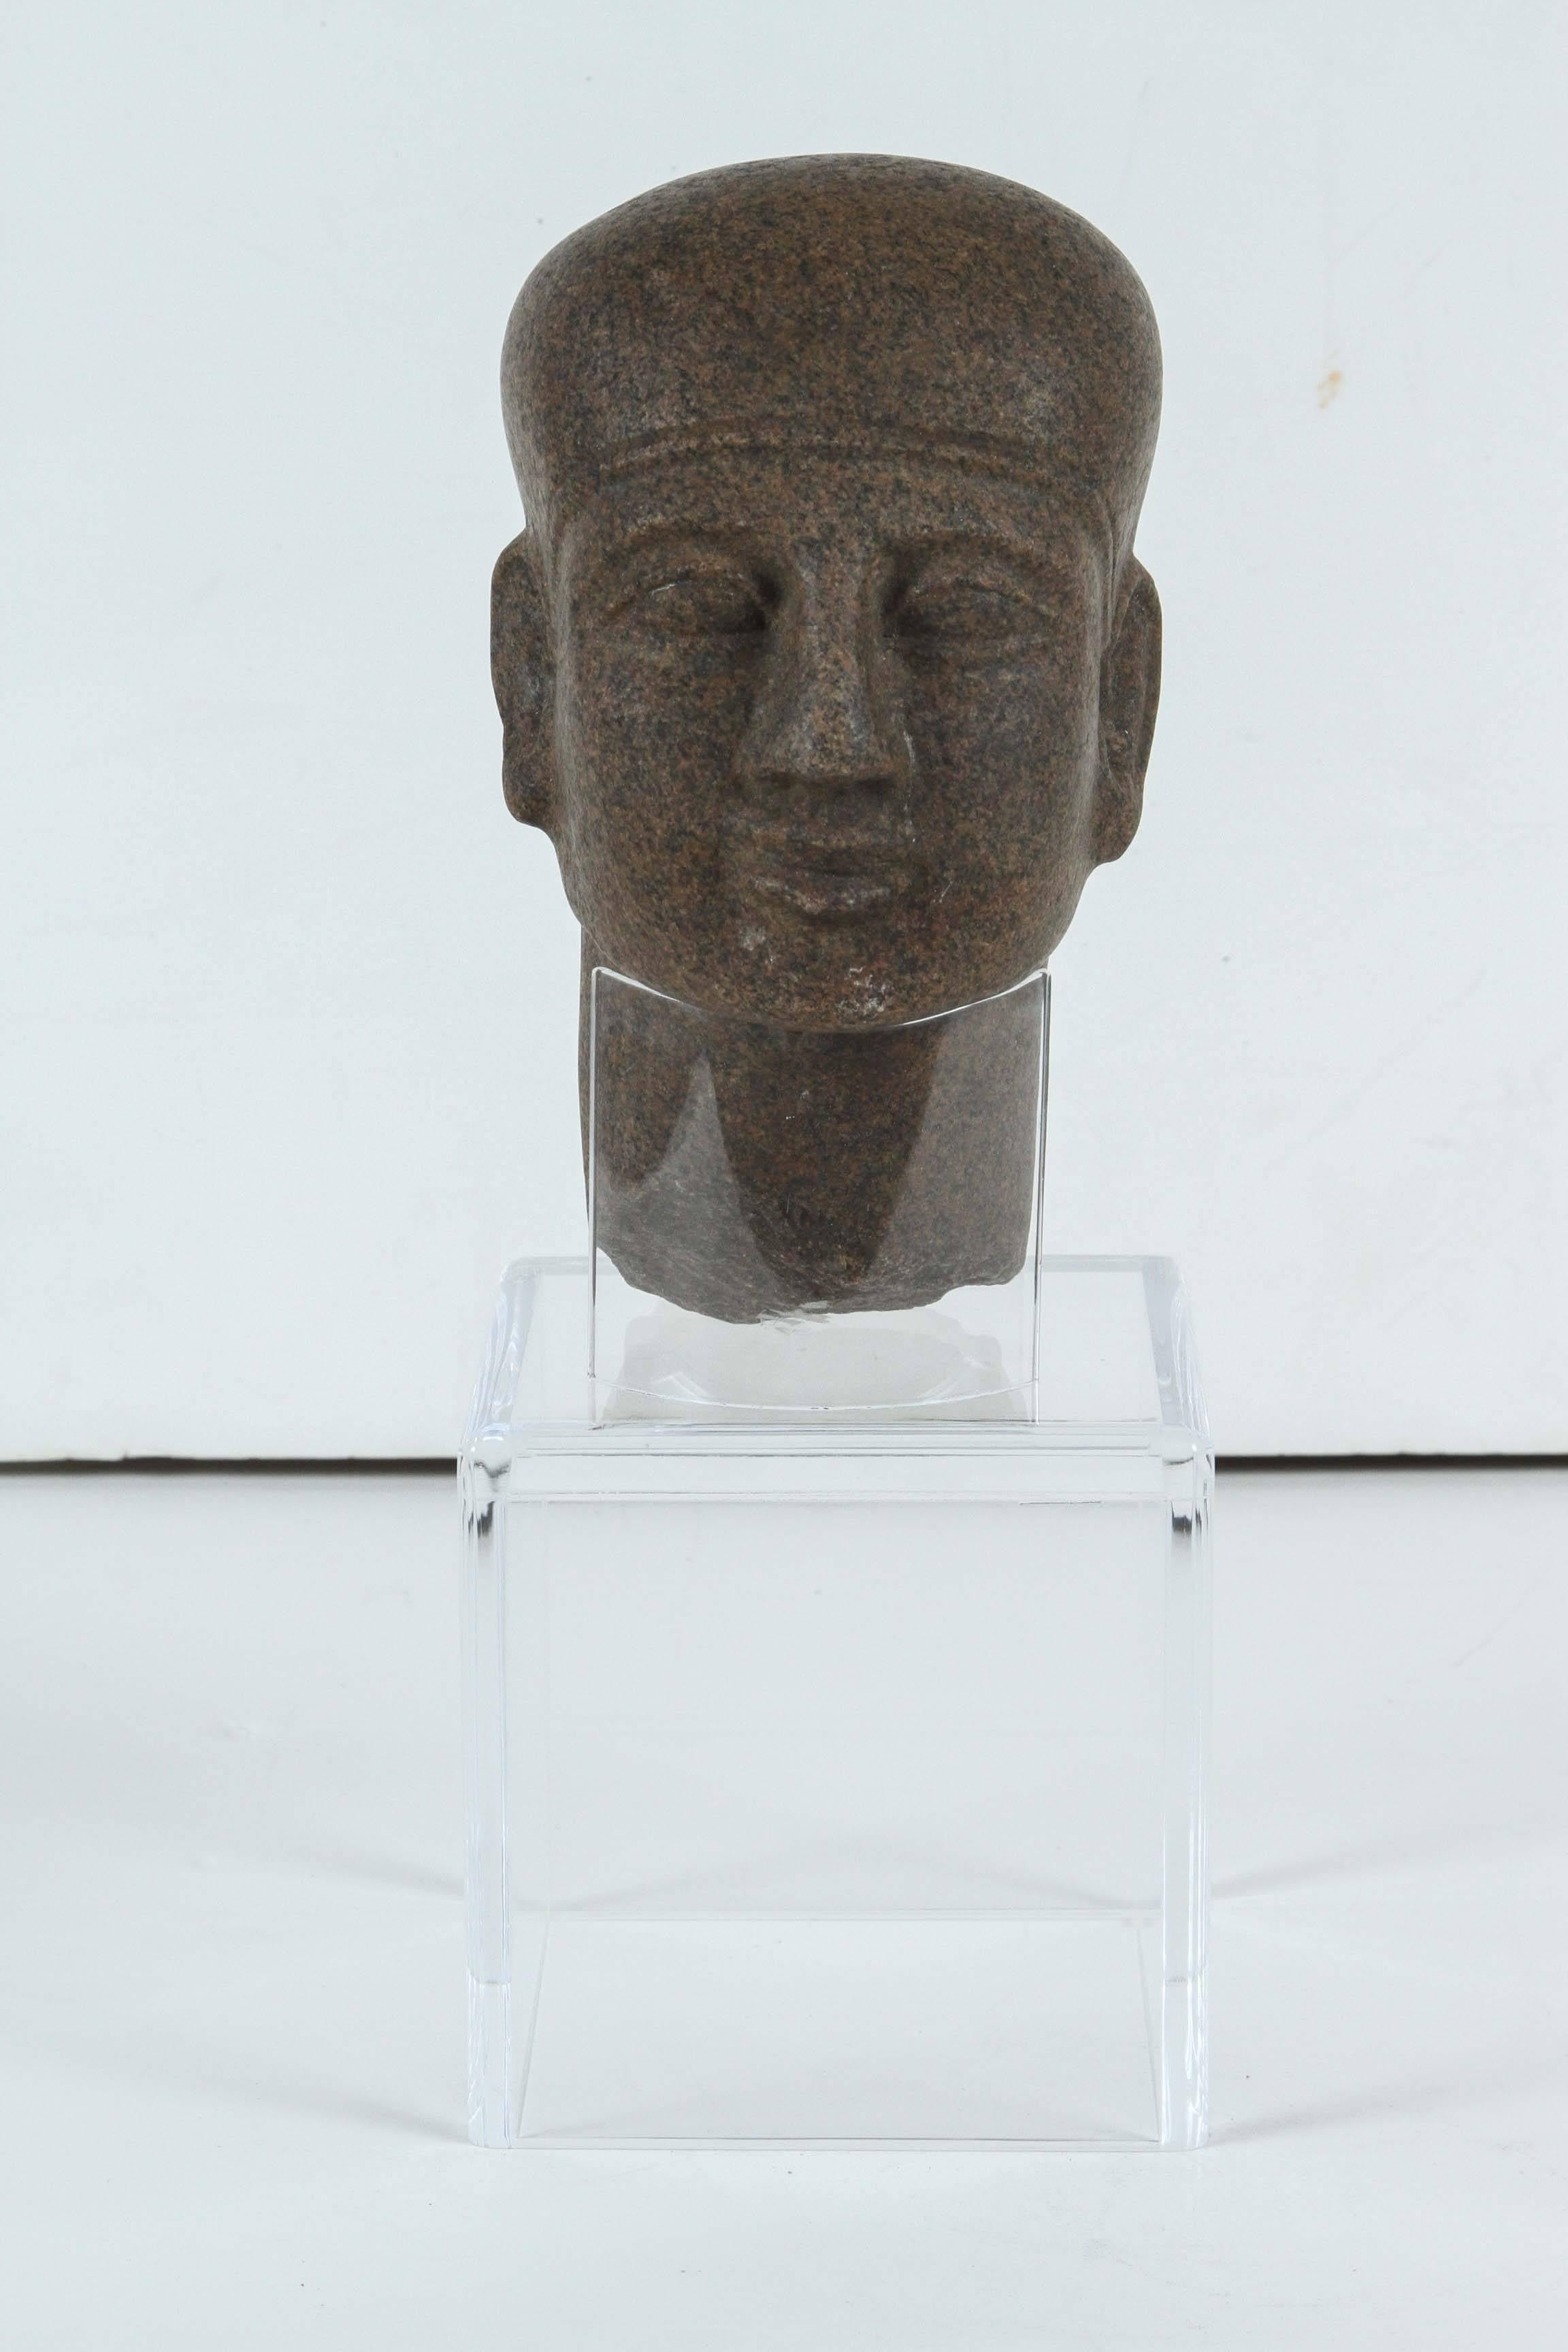 Beautifully carved, granite head of a priest mounted on a custom, Lucite base.